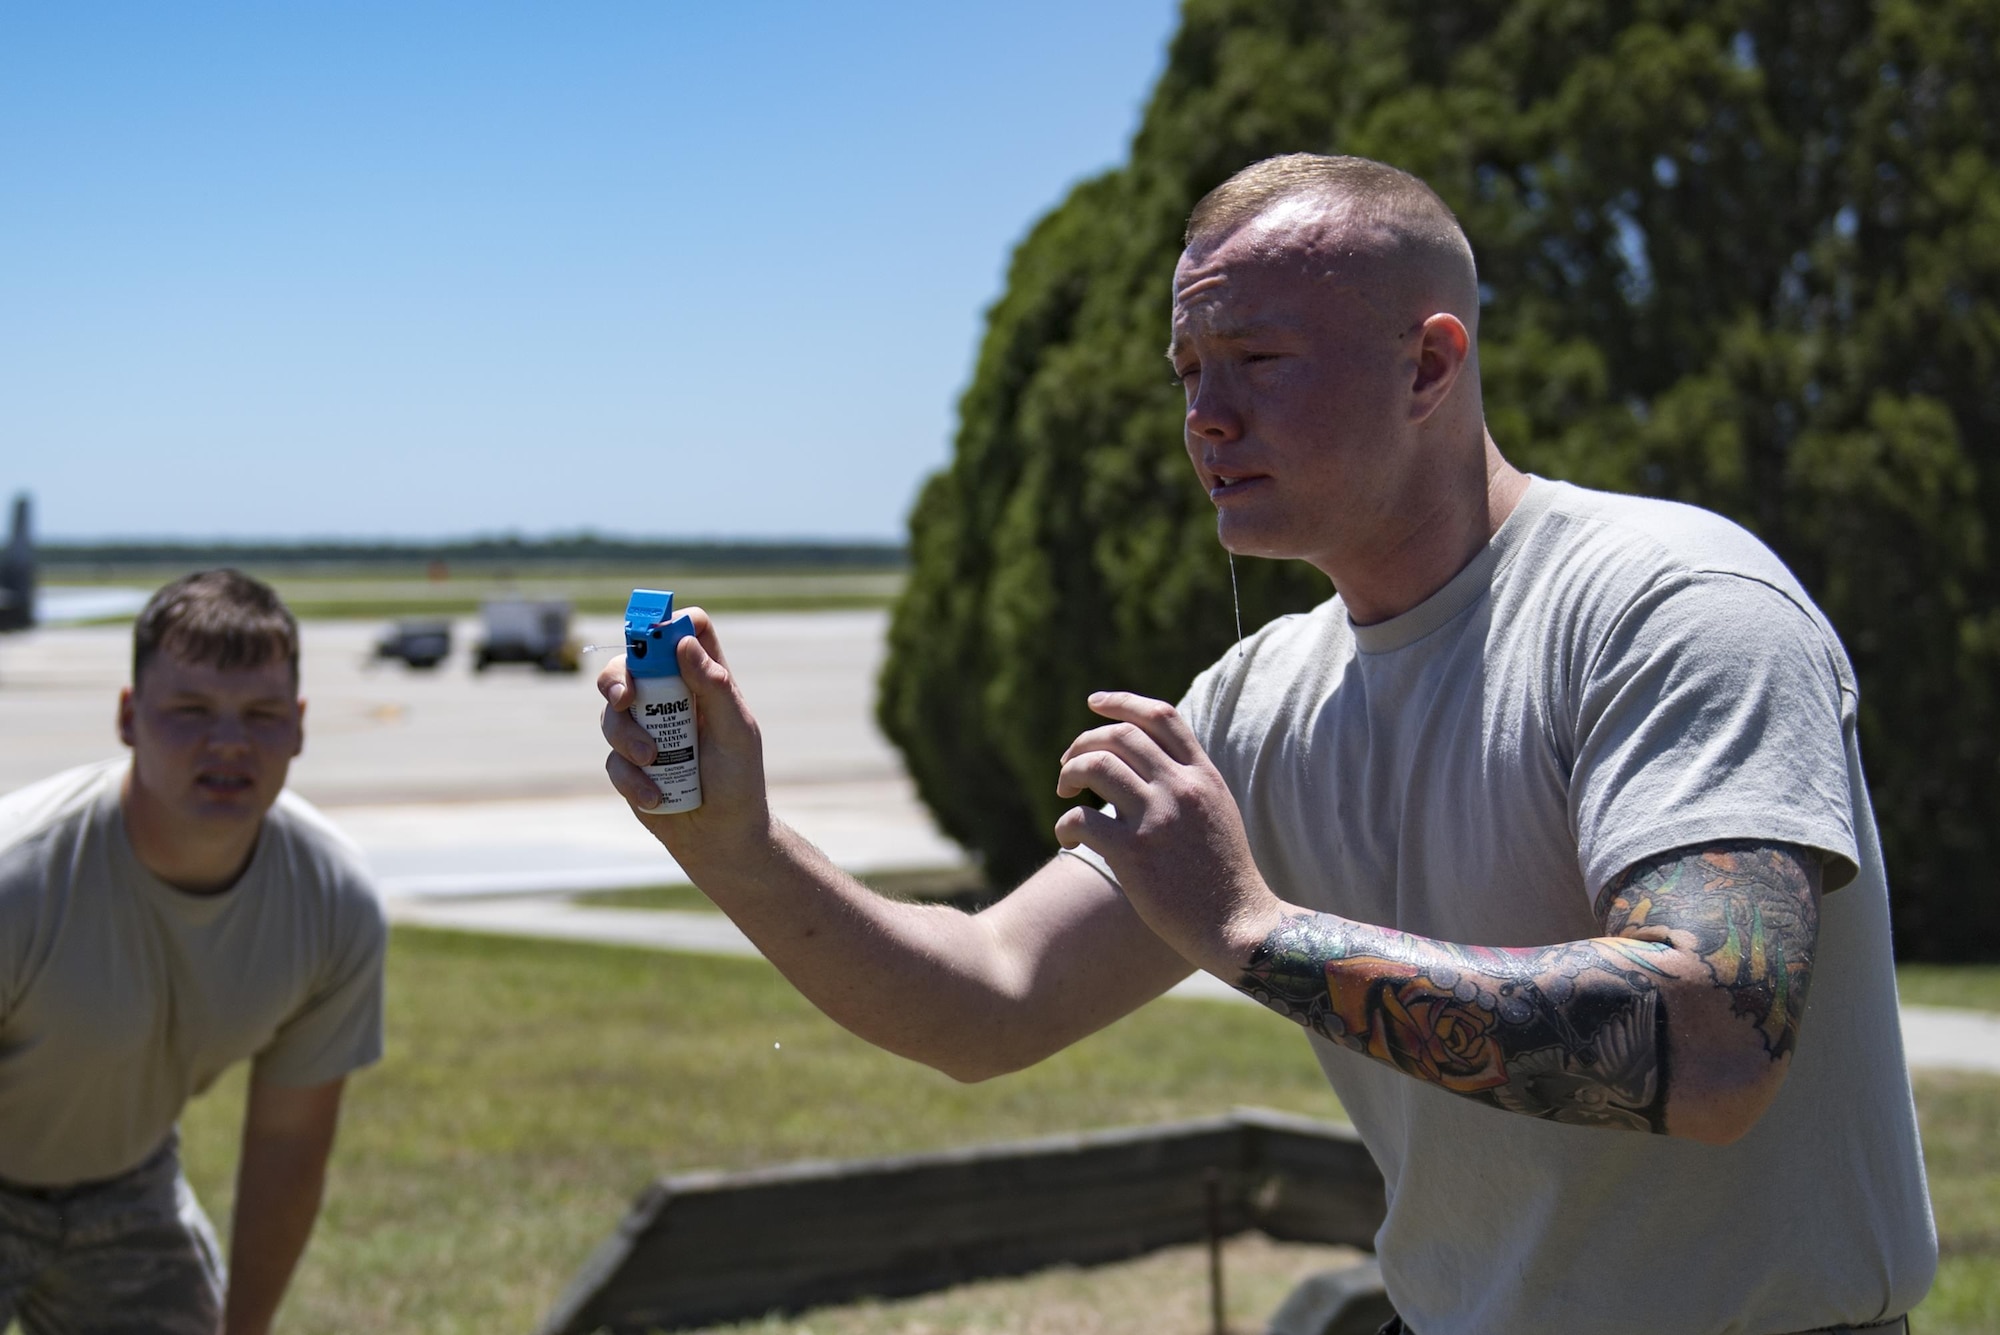 Airman 1st Class Hunter Ogle, 23d Security Forces Squadron entry controller, attempts to complete an initial confidence course after being sprayed in the face with oleoresin capsicum spray, also known as pepper spray, May 2, 2017, at Moody Air Force Base, Ga. Airmen must complete a class then pass a physical confidence course while experiencing the effects of oleoresin capsicum spray to be qualified to carry the less-than-lethal tool. (Air Force photo by Airman 1st Class Daniel Snider)